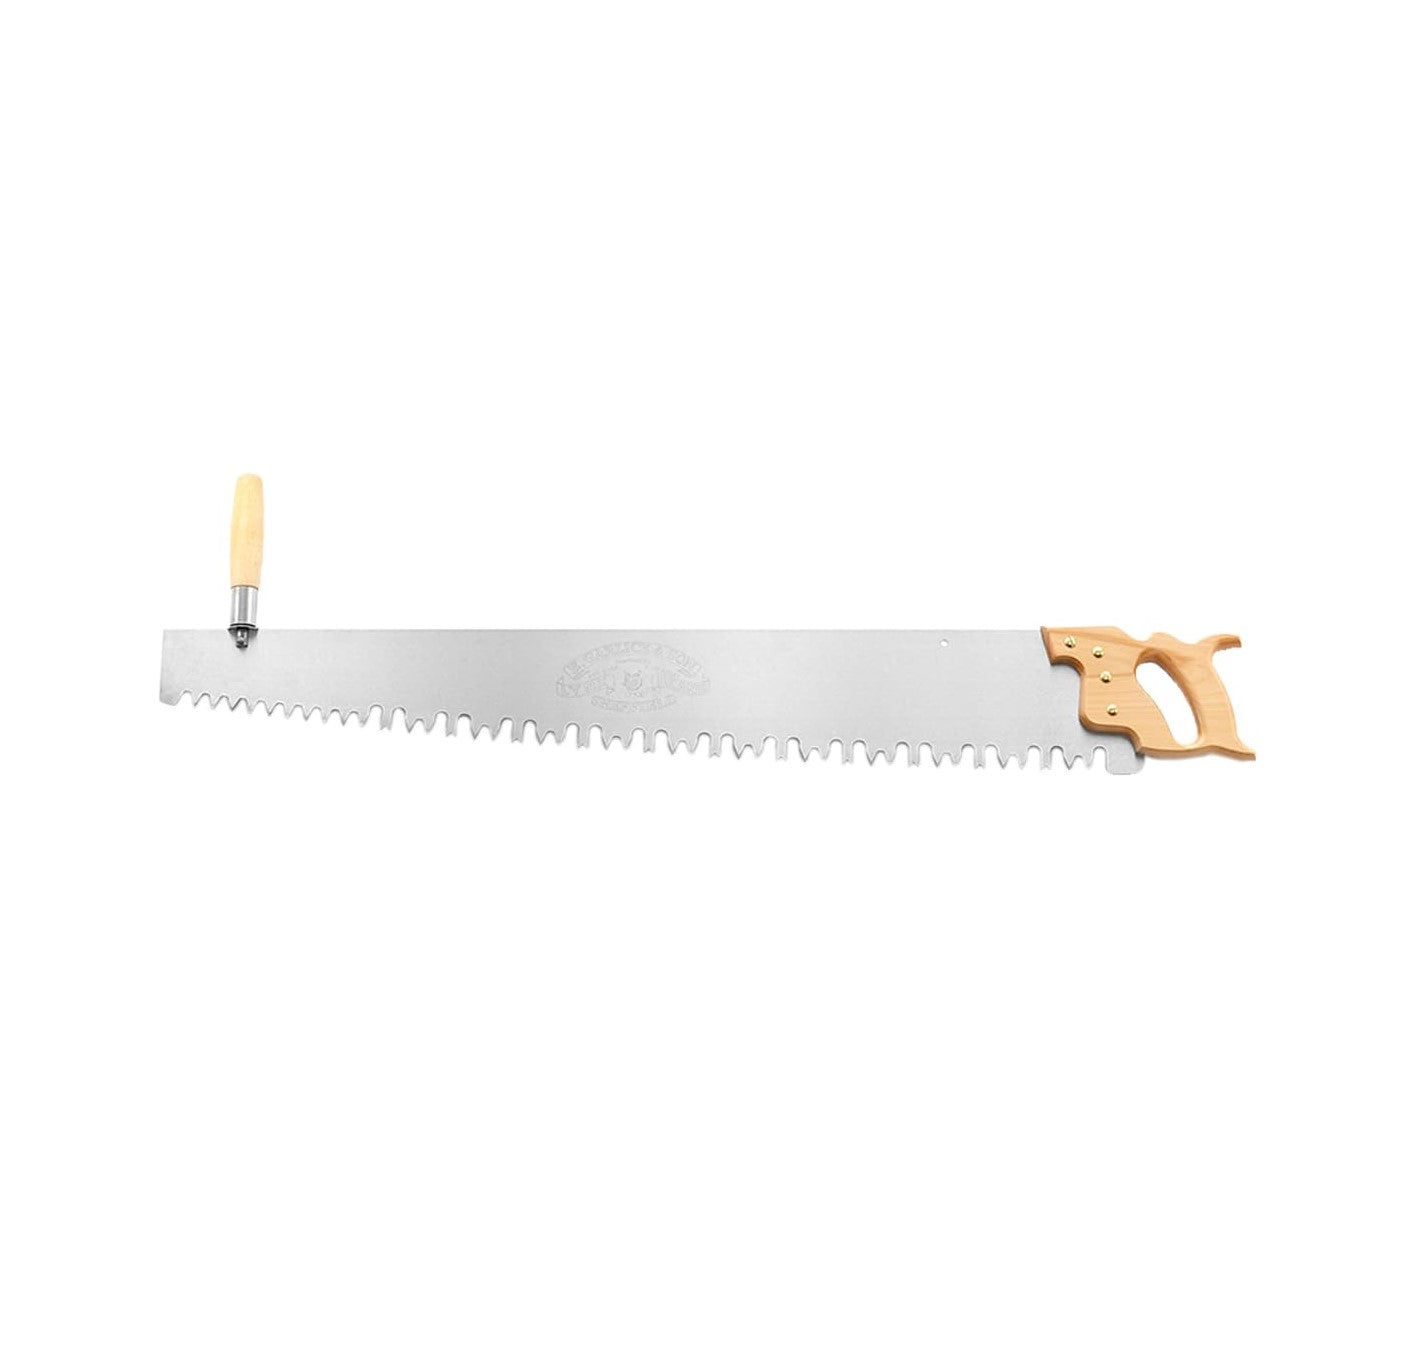 Crosscut saw Two-man saw Hand Saws, chainsaw, technic, brush, bow